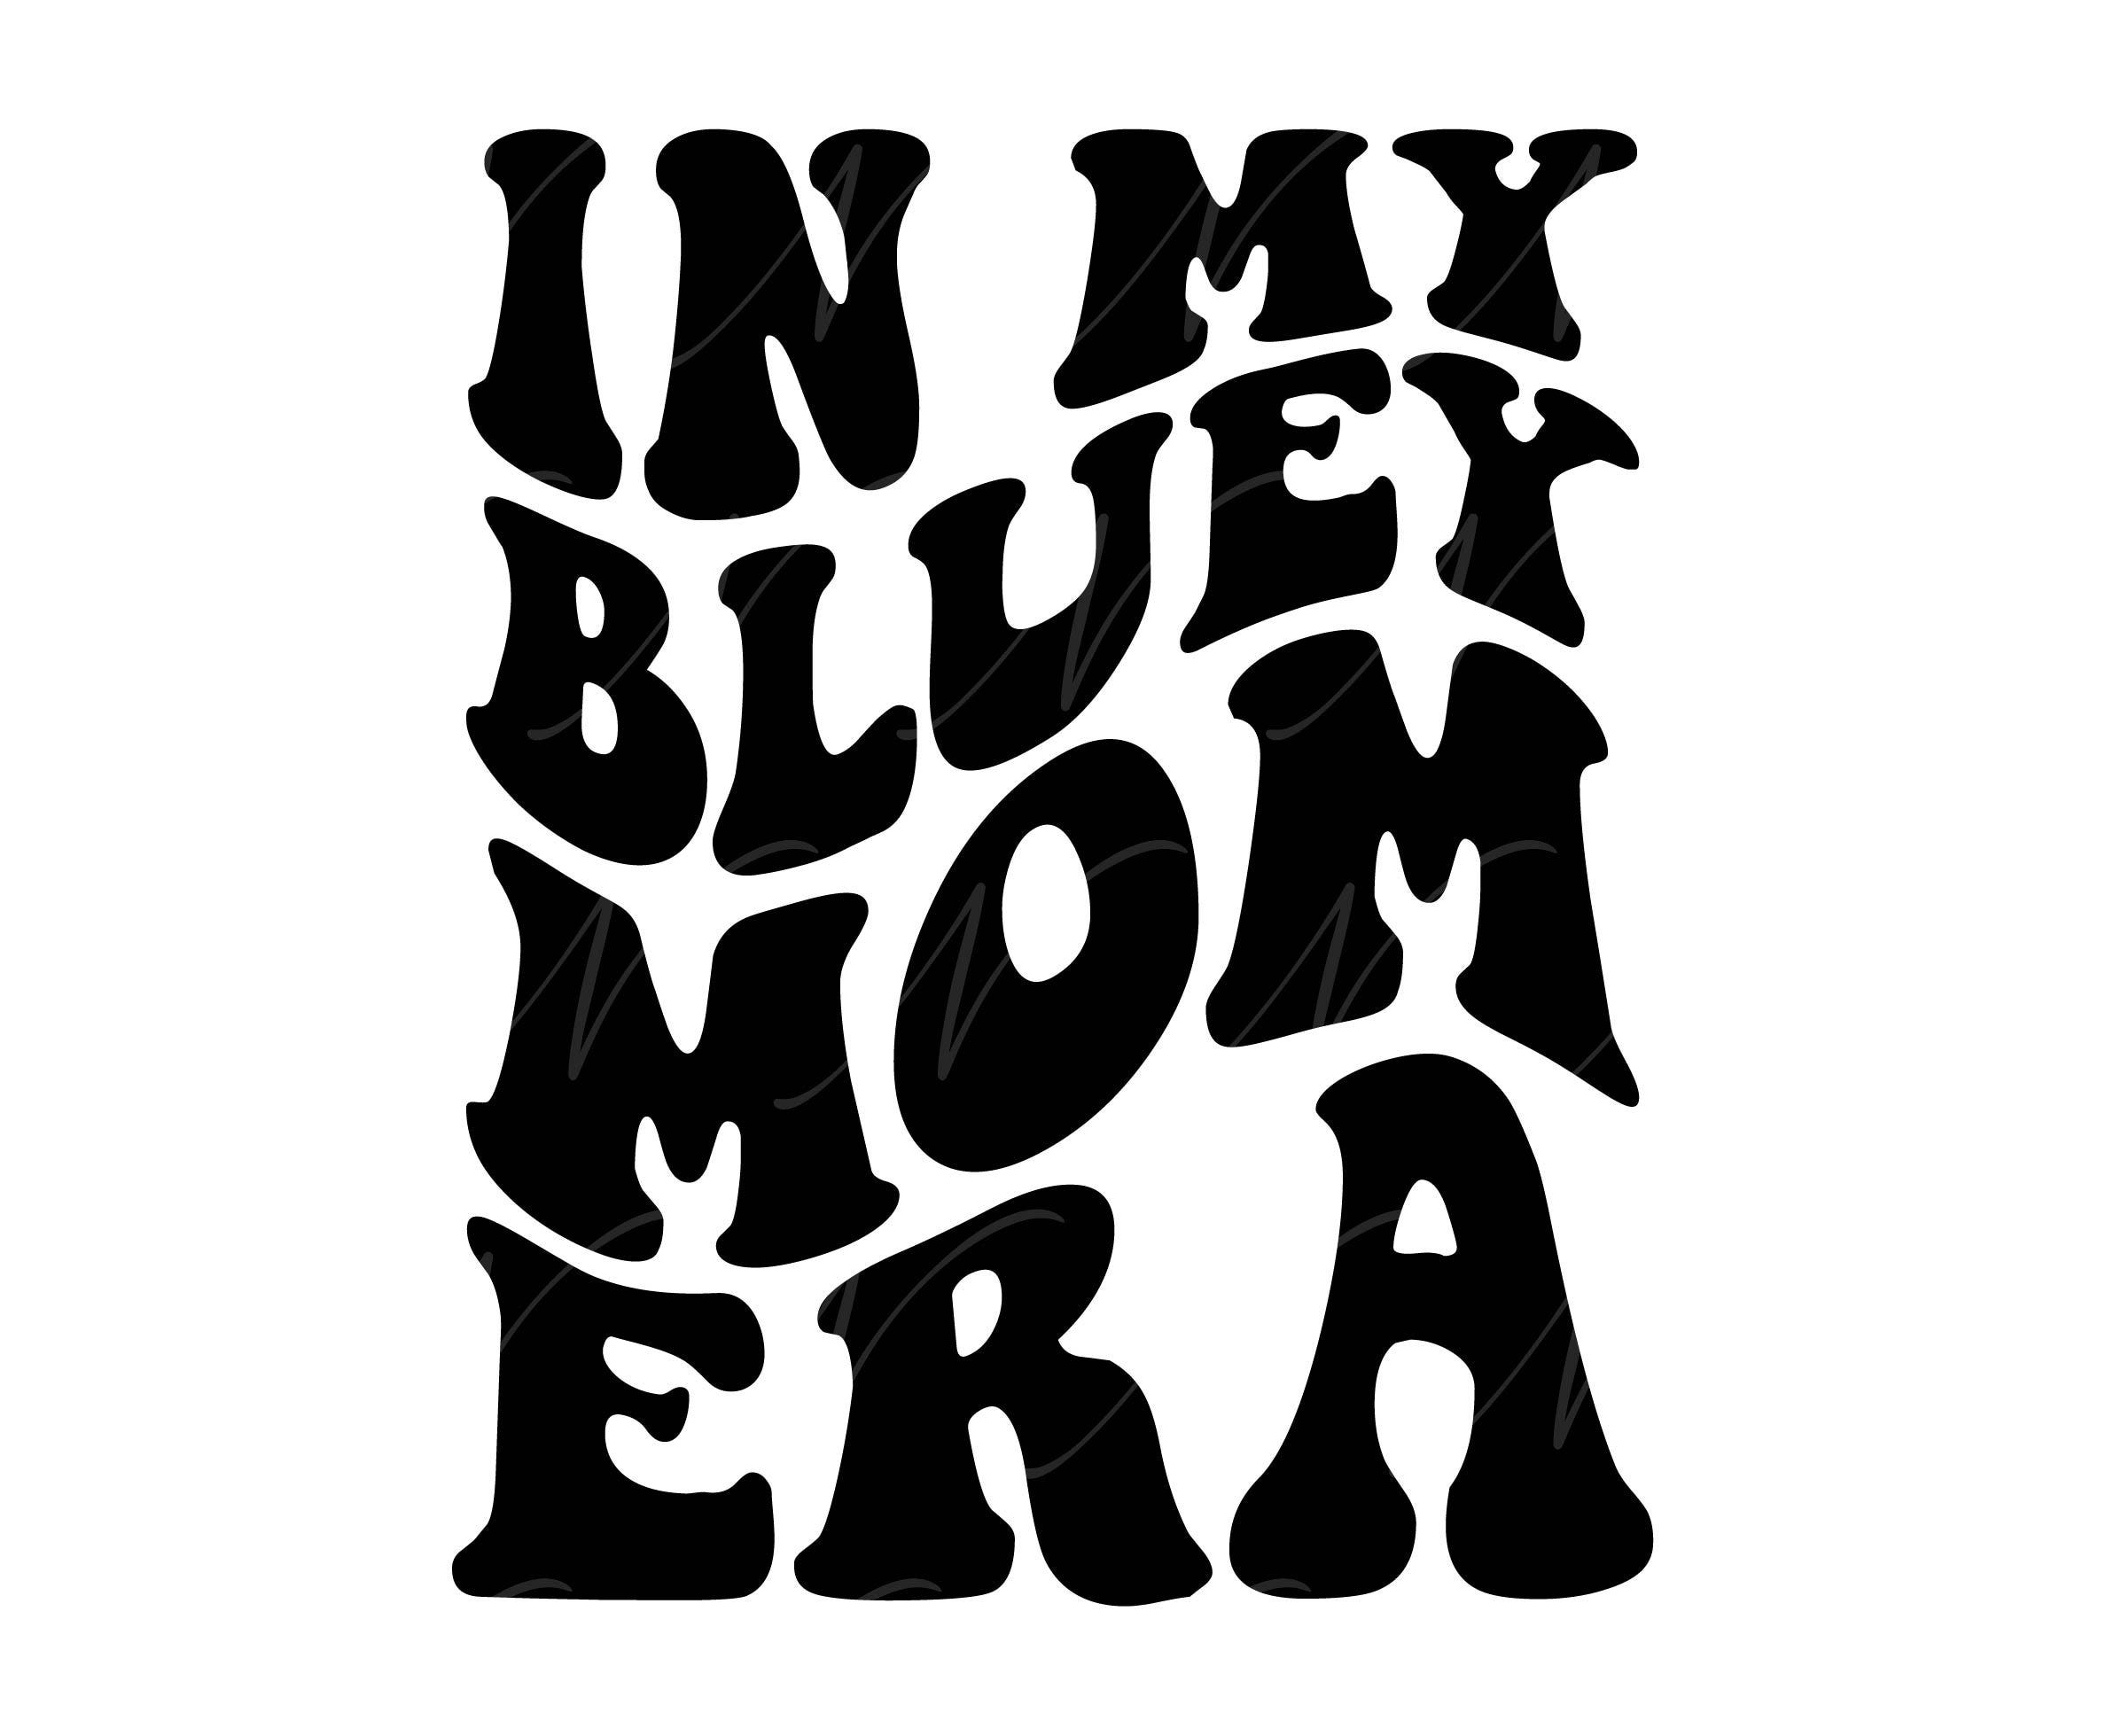 In My Bluey Mom Era SVG, PNG, PDF, Bluey Mom Shirt Png, Dog Mom Svg, Dog Family Png, Retro Wavy Groovy Letters, Cut File Cricut, Silhouette.